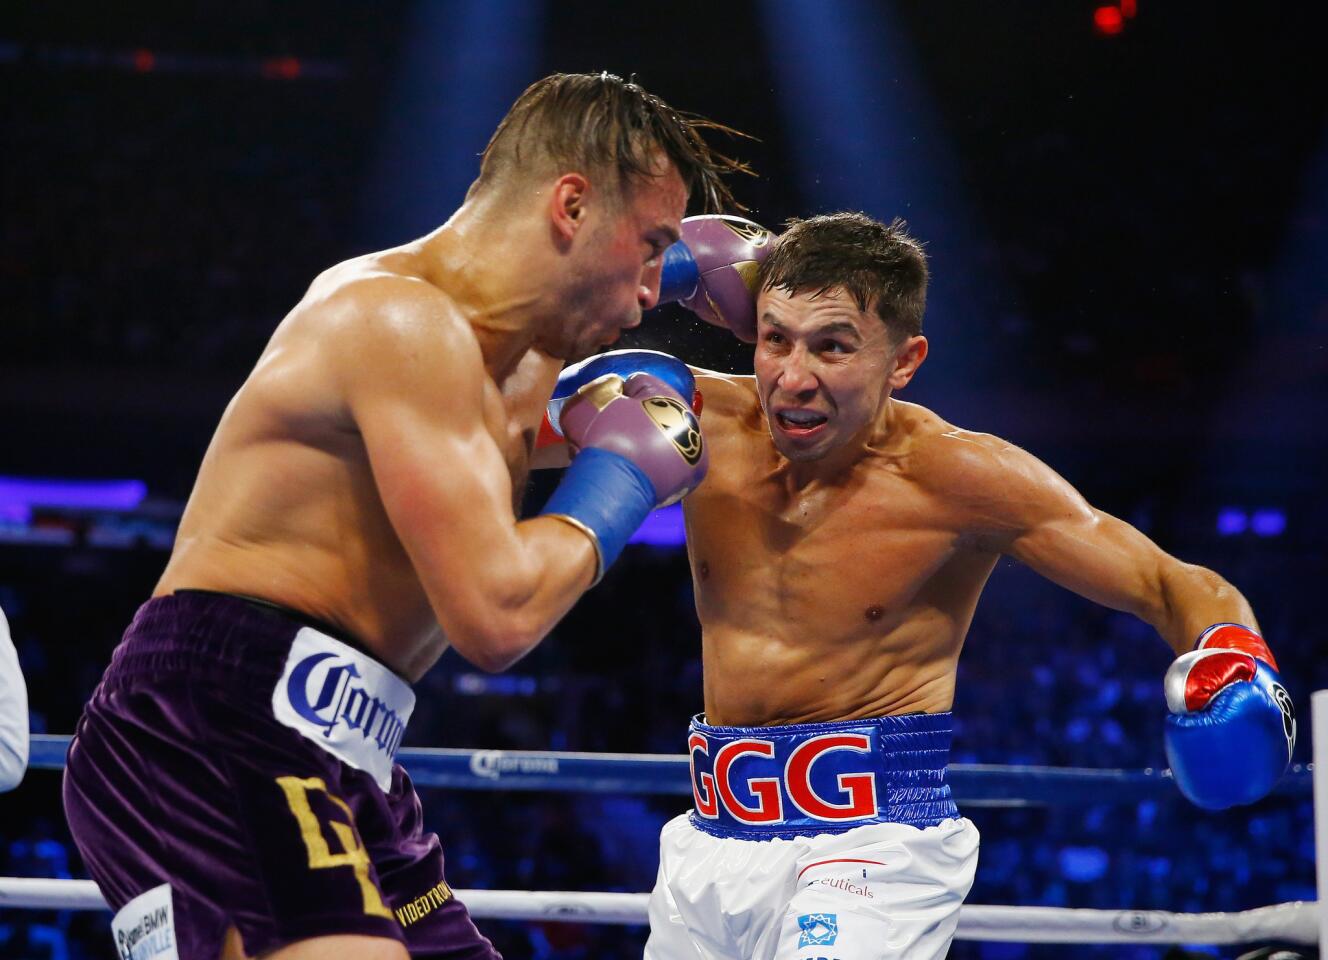 David Lemieux, left, and Gennady Golovkin trade punches in the middle of the ring during their middleweight title fight Saturday night in New York.